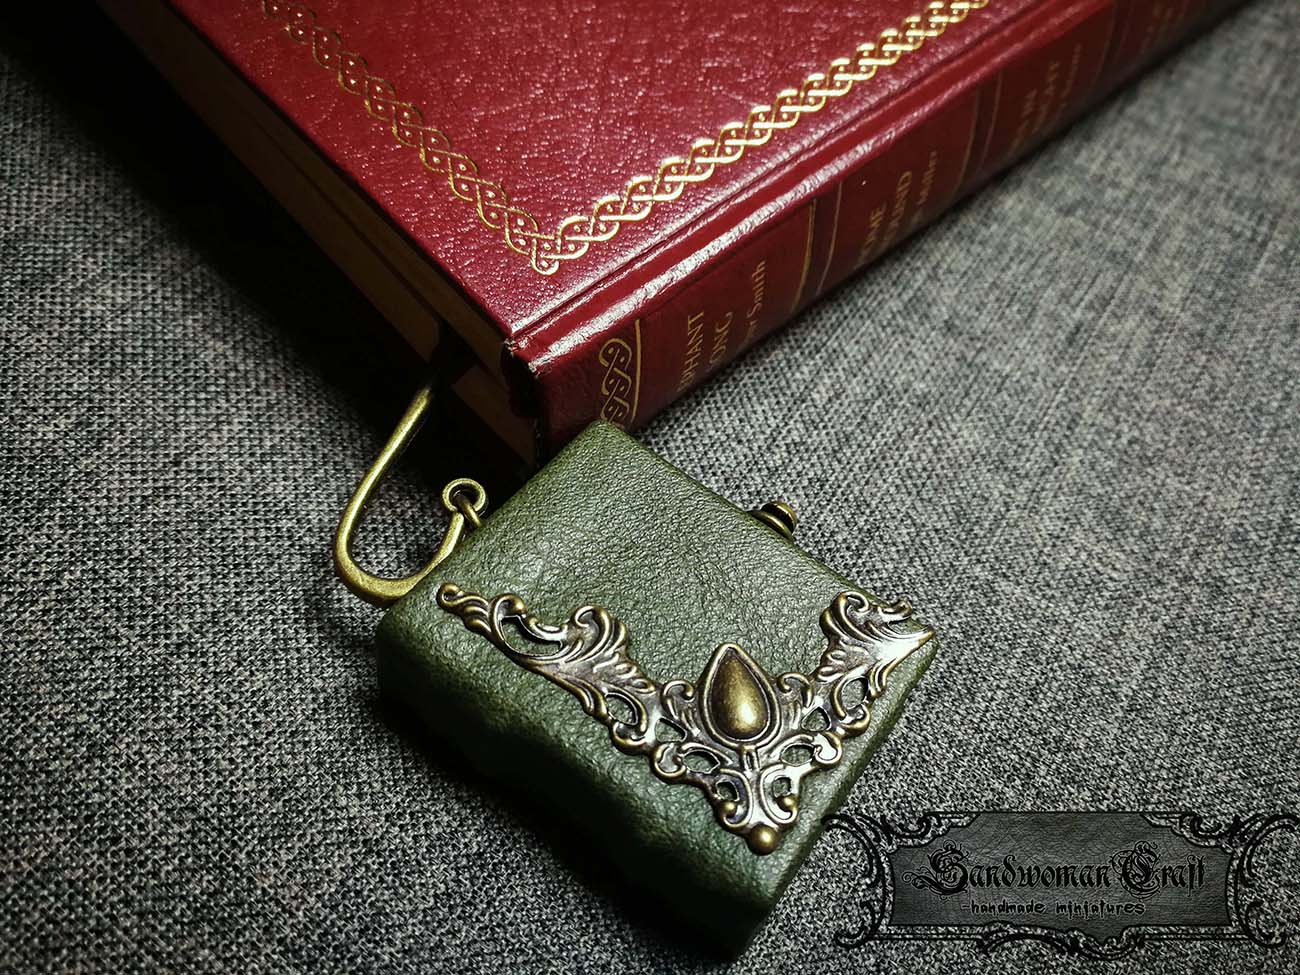 Bookmark with miniature leather book